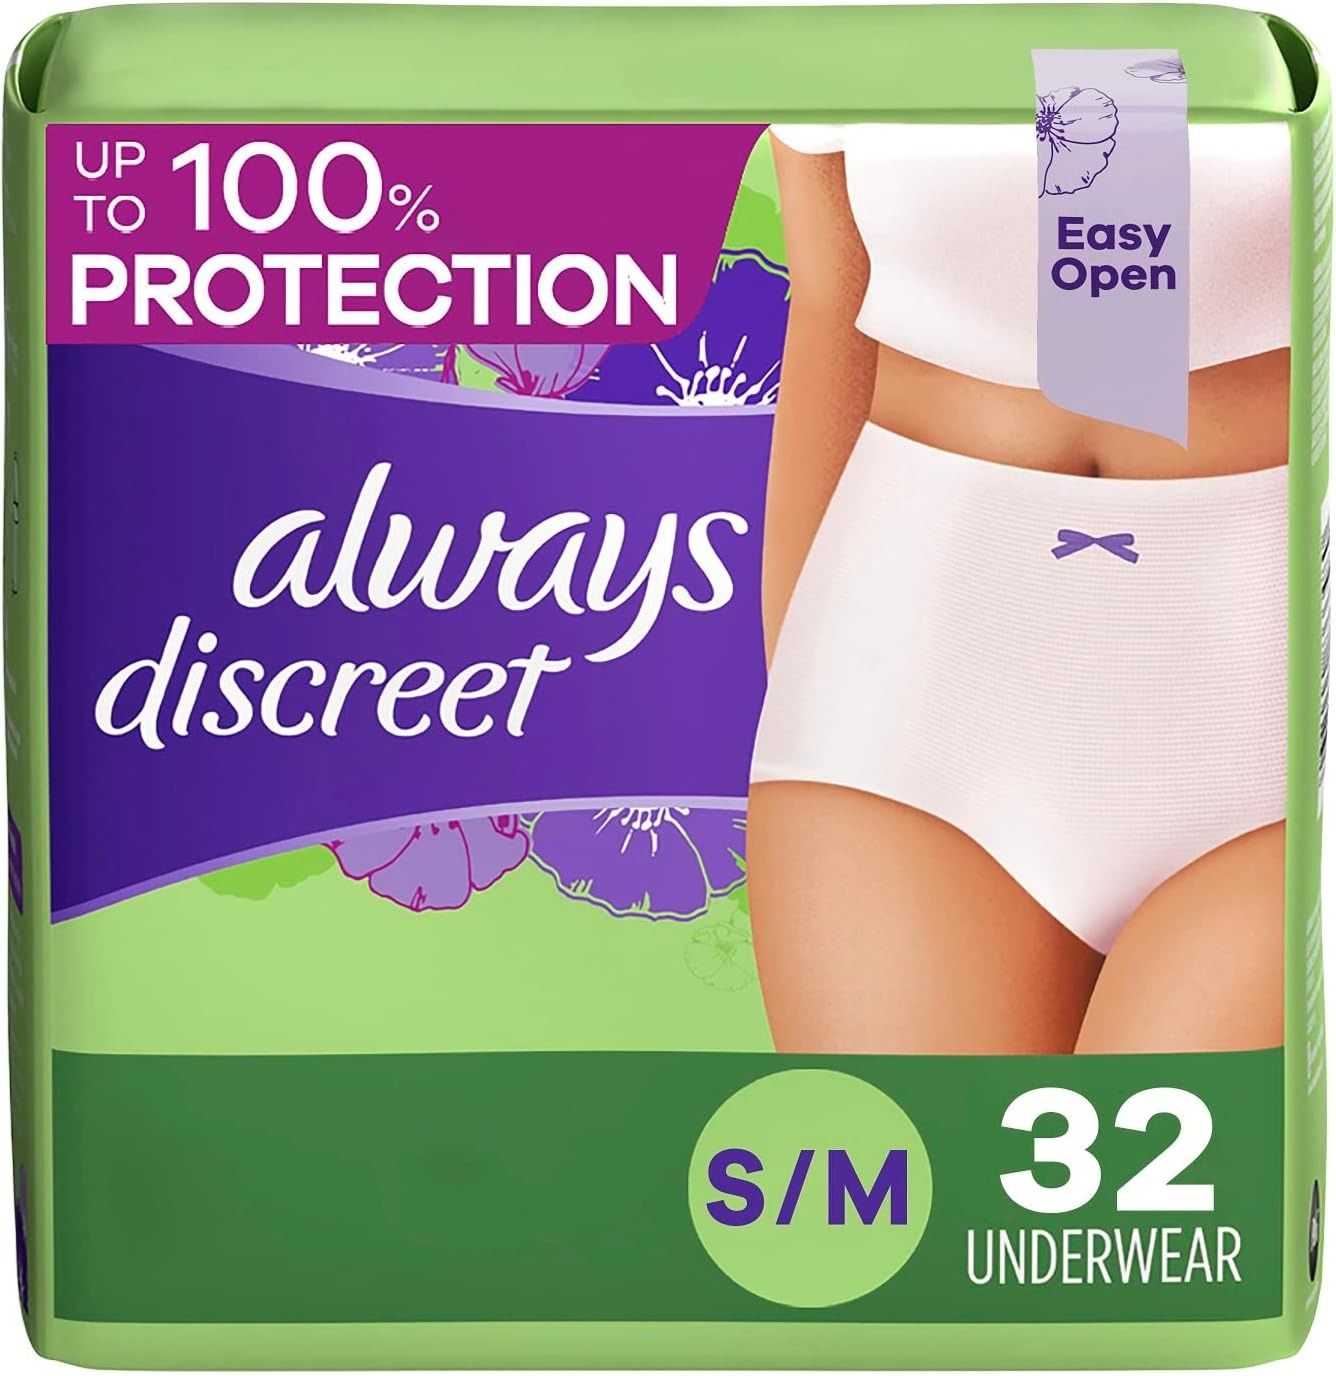 Fridamom Disposable One Use Strong Elastic Spandex Woman's Panties